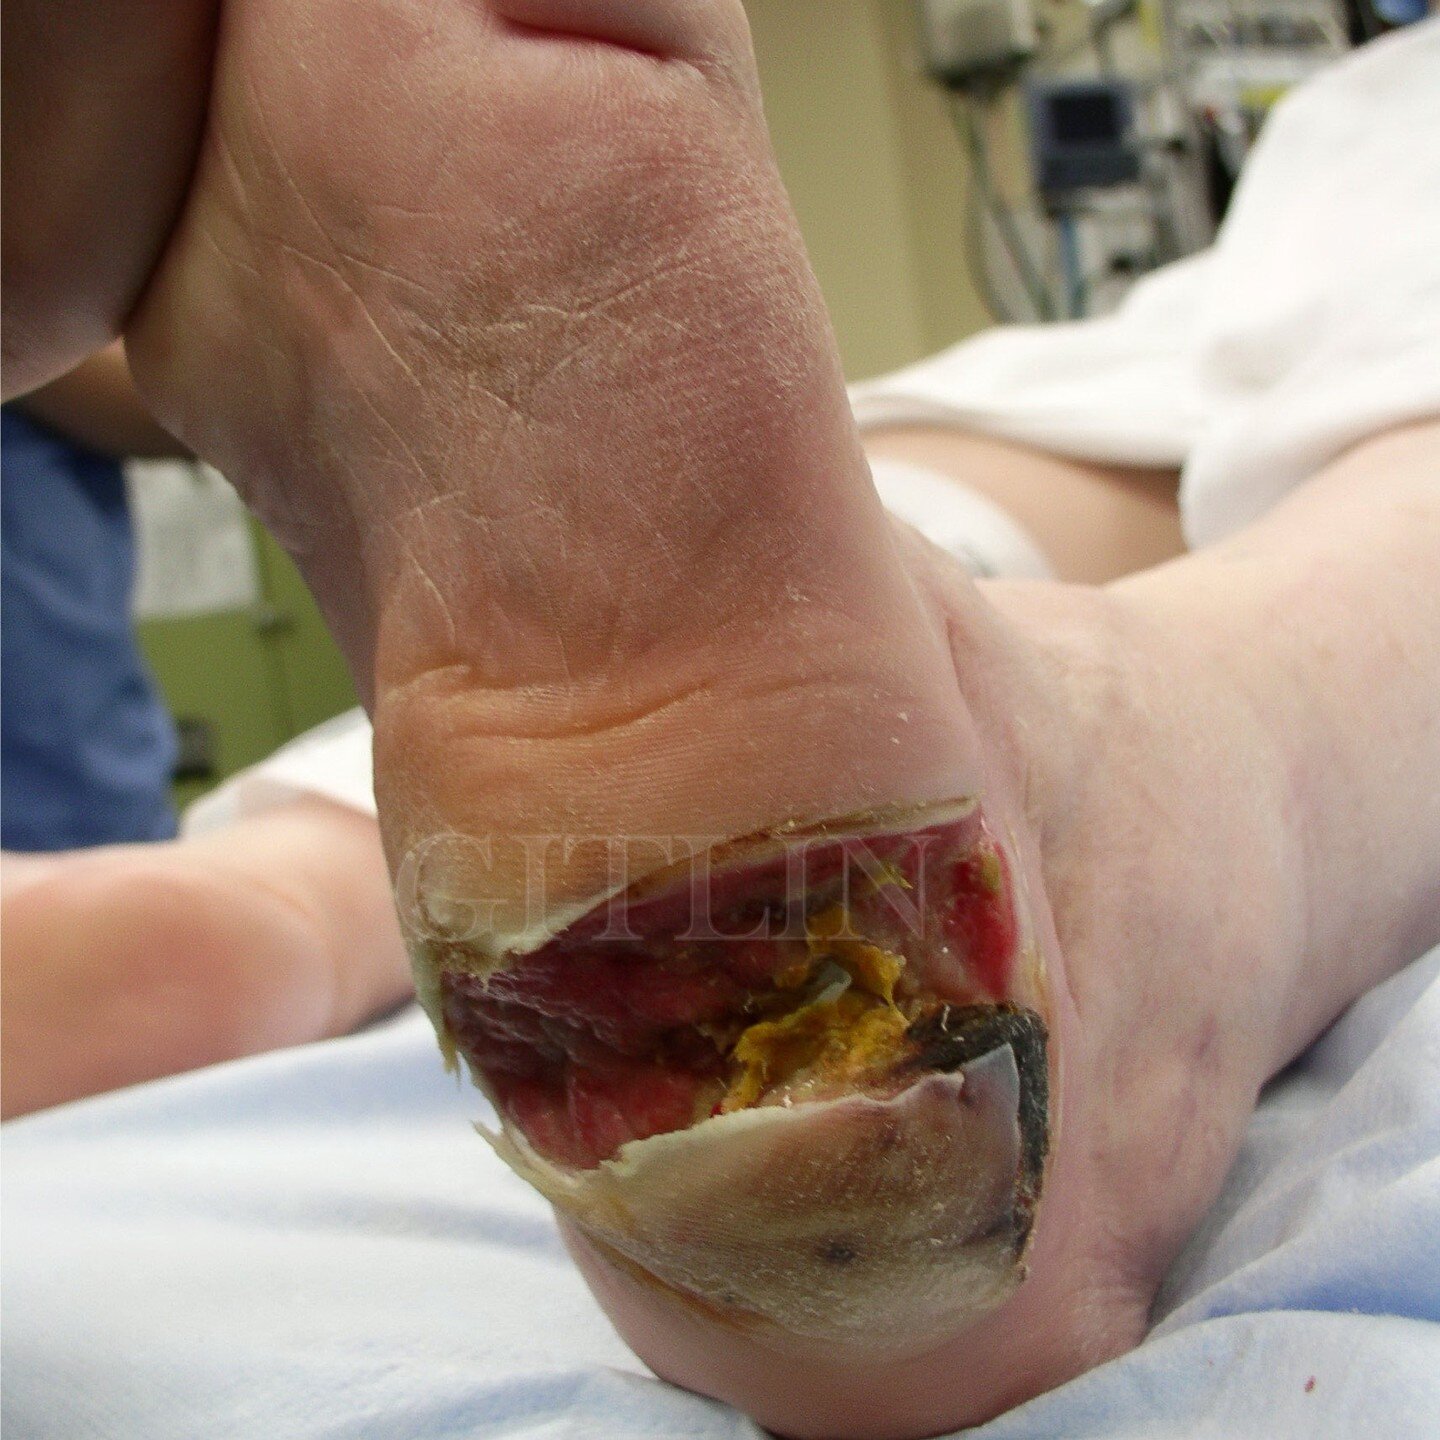 Diabetic wound healed with new flap.

#surgery #footsurgery #diabeticfoot #woundcare #skingraft #footdoctor #footsurgeon #podiatry #drdavidgitlin